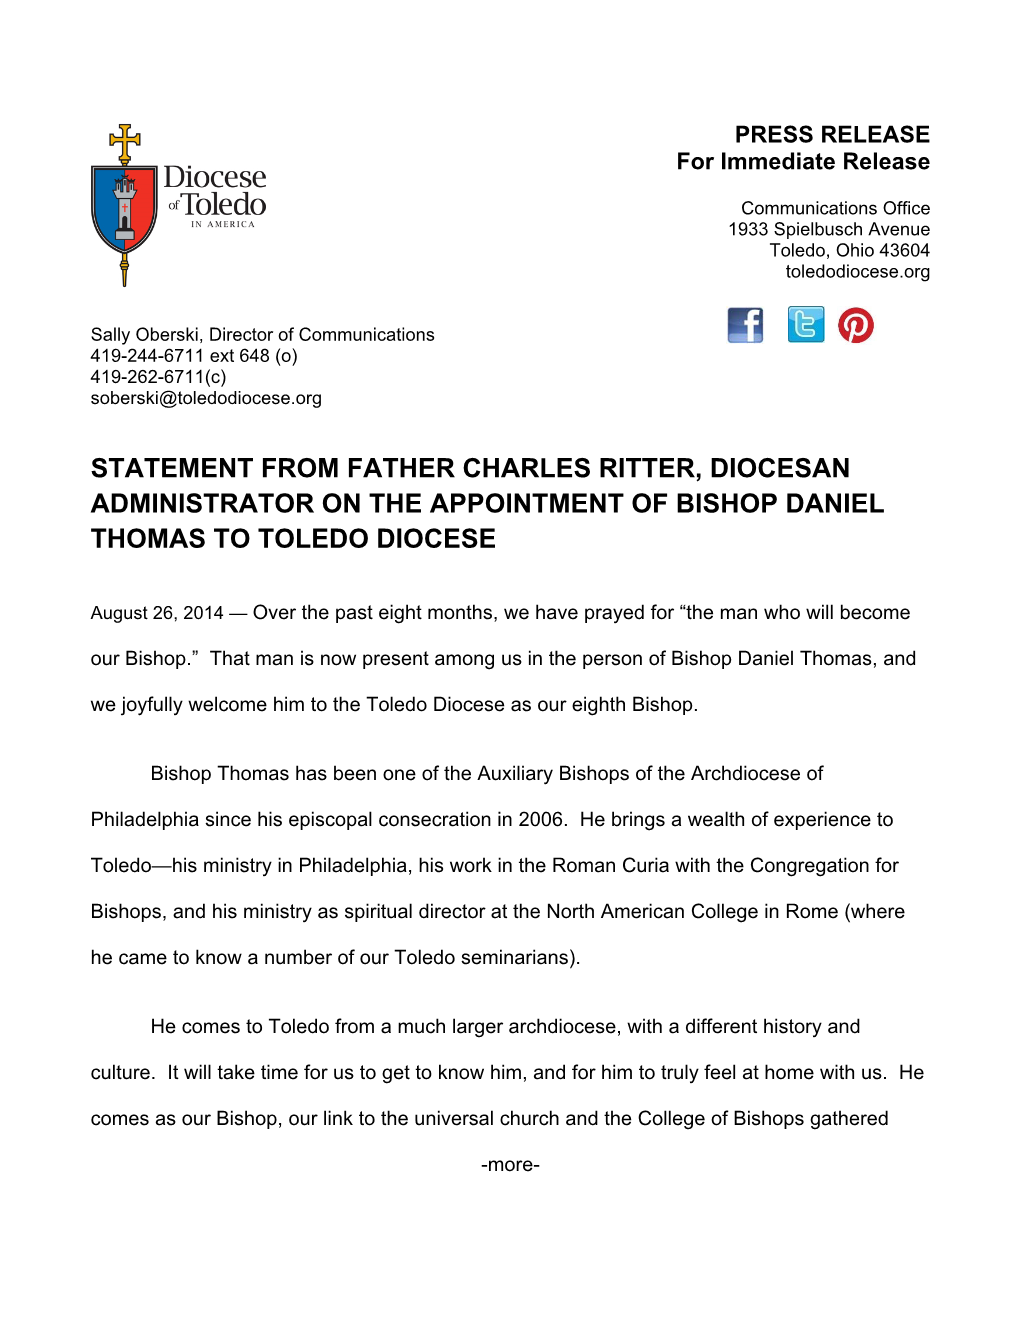 Statement from Father Charles Ritter, Diocesan Administrator on the Appointment of Bishop Daniel Thomas to Toledo Diocese